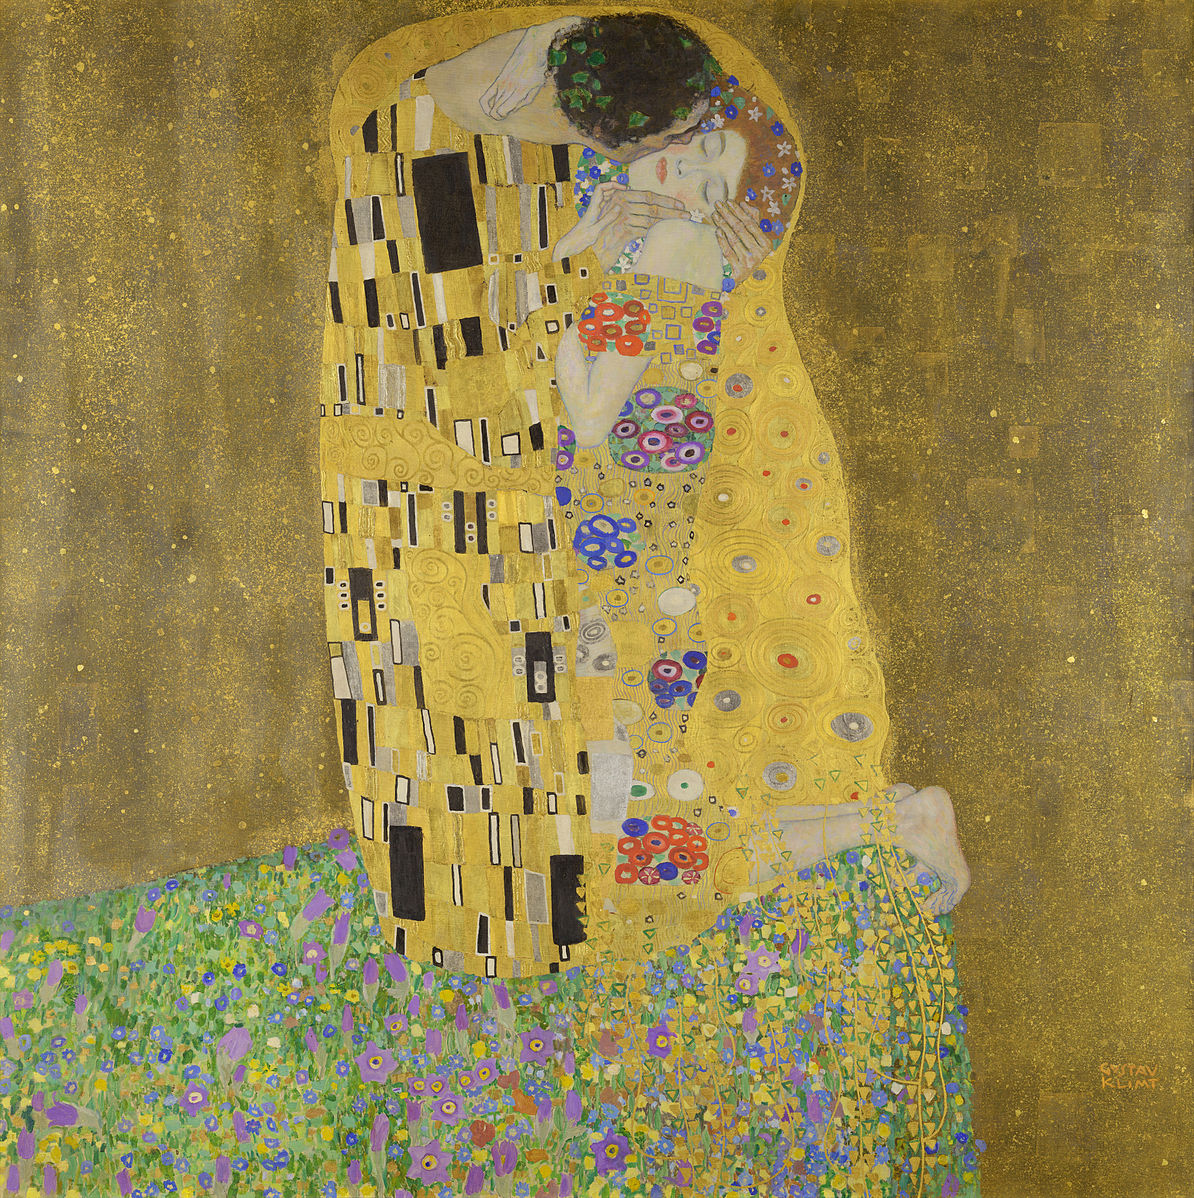 A man and woman embraced in a kiss against a gold background